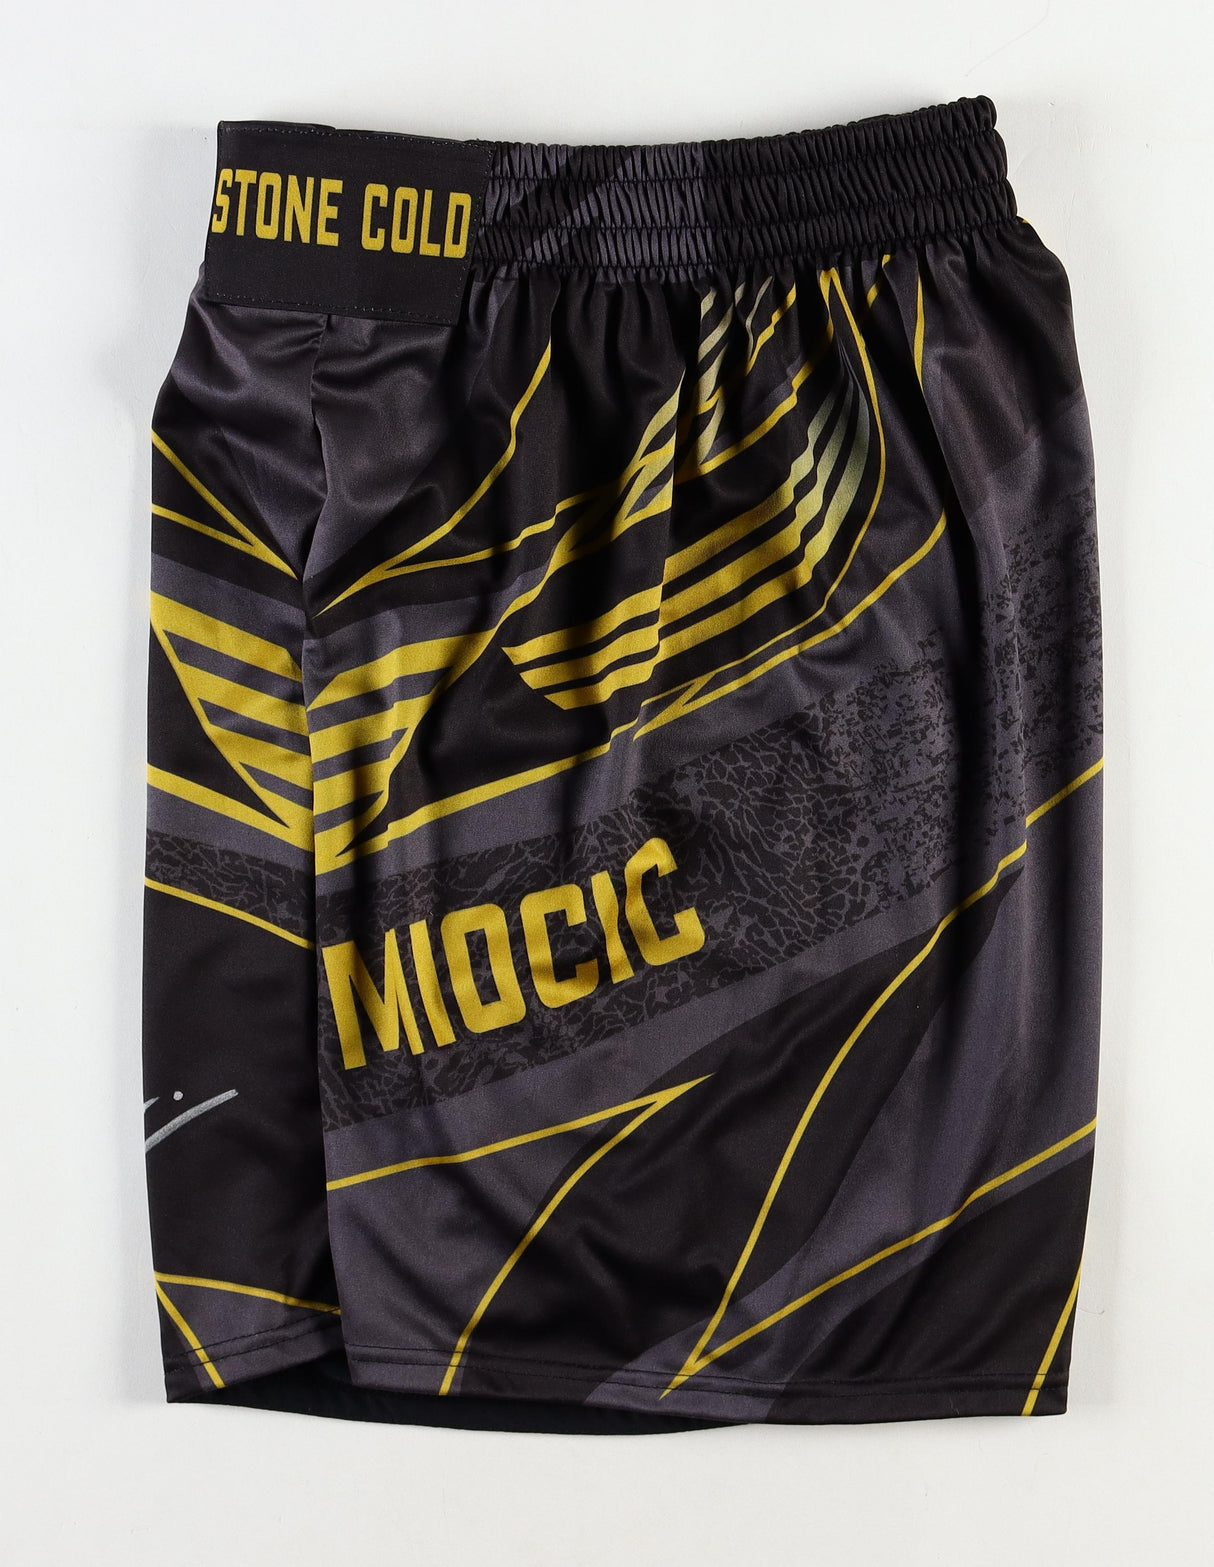 Stipe Miocic Signed UFC Fight Shorts (Beckett Witnessed)